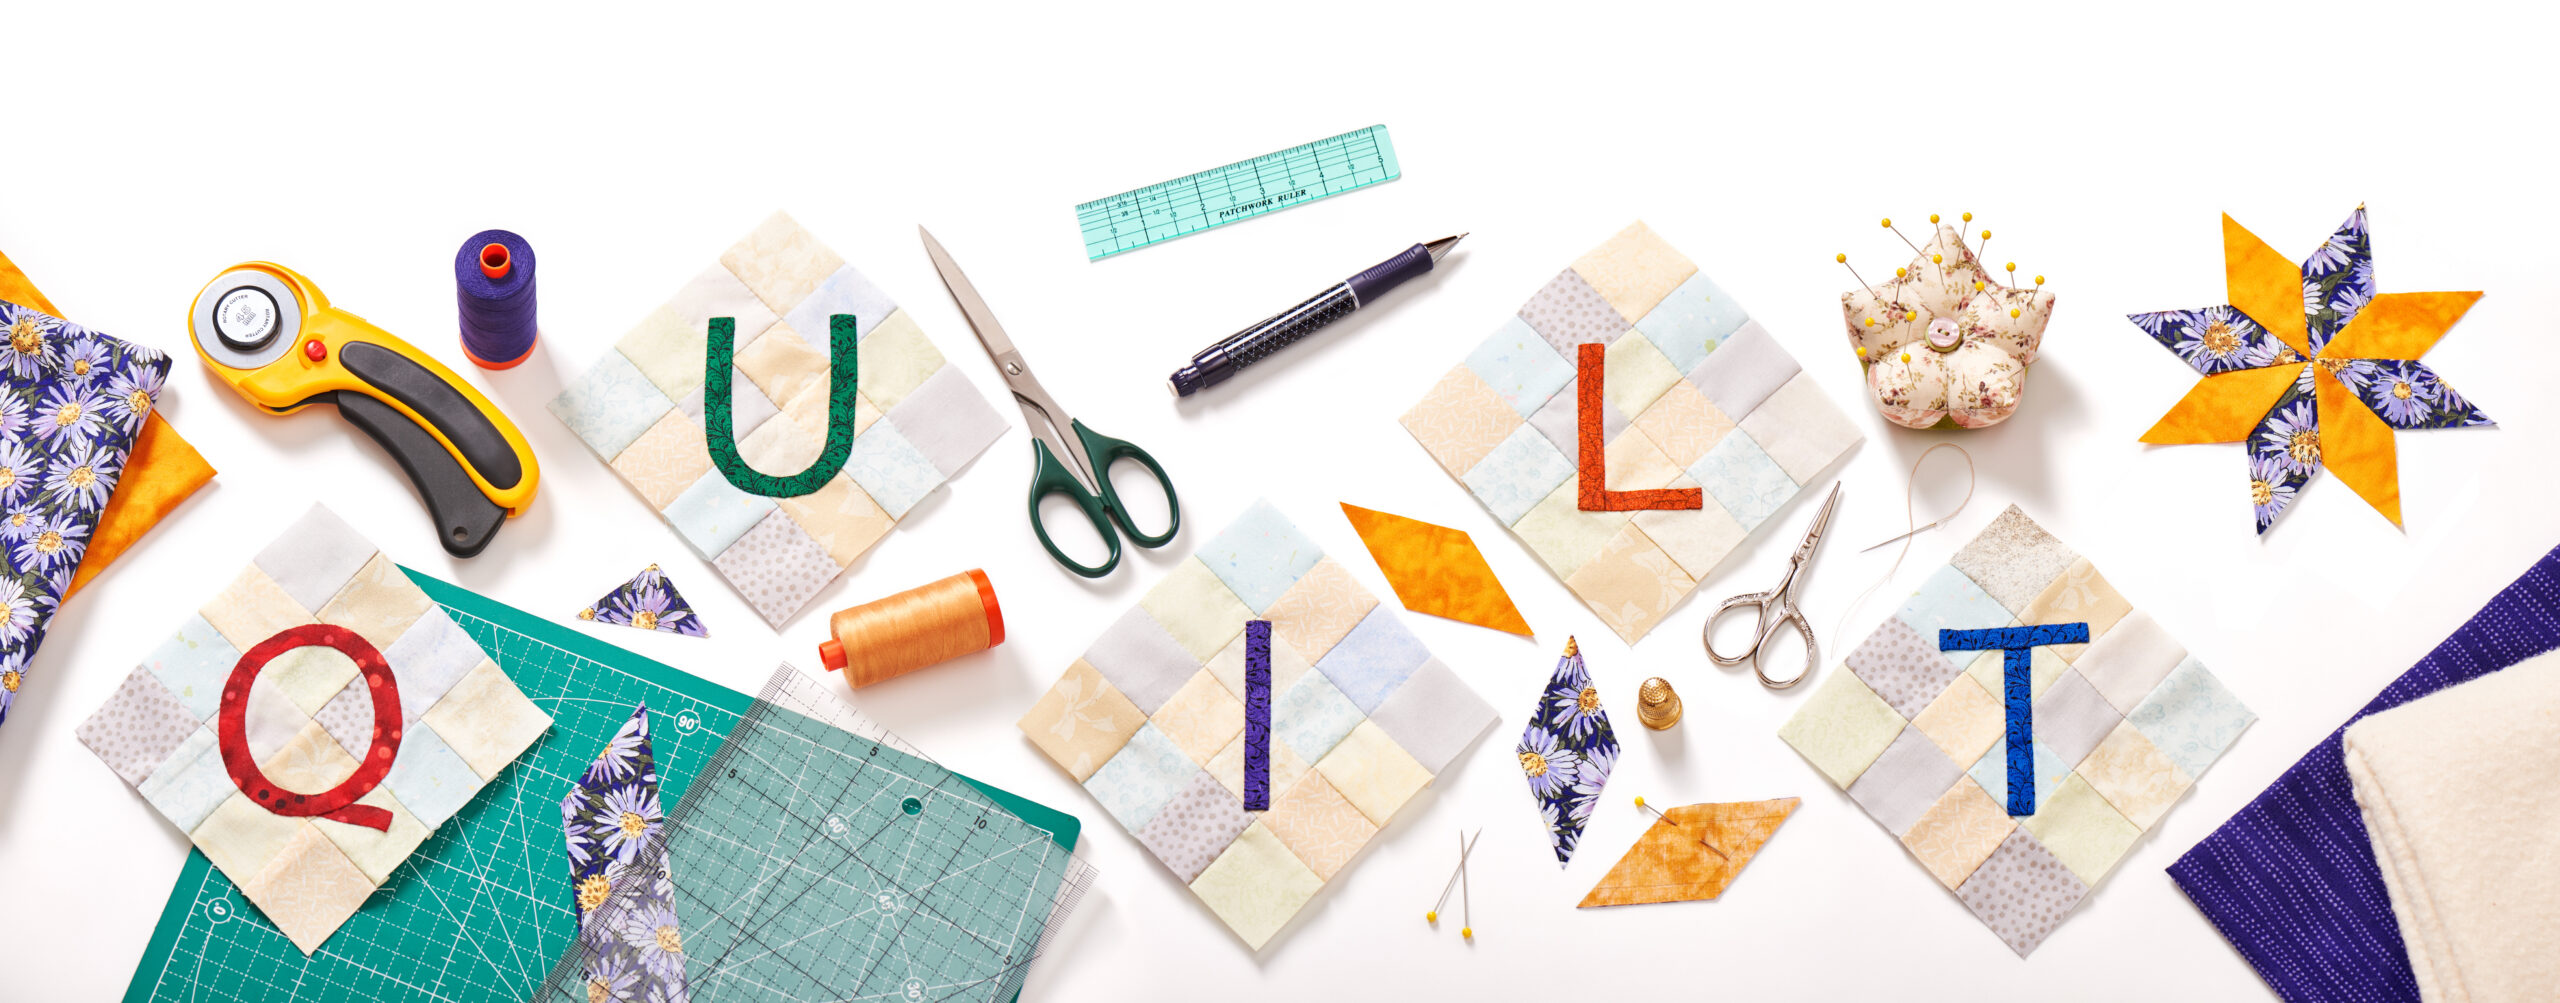 7 Things Every Quilter Should Own